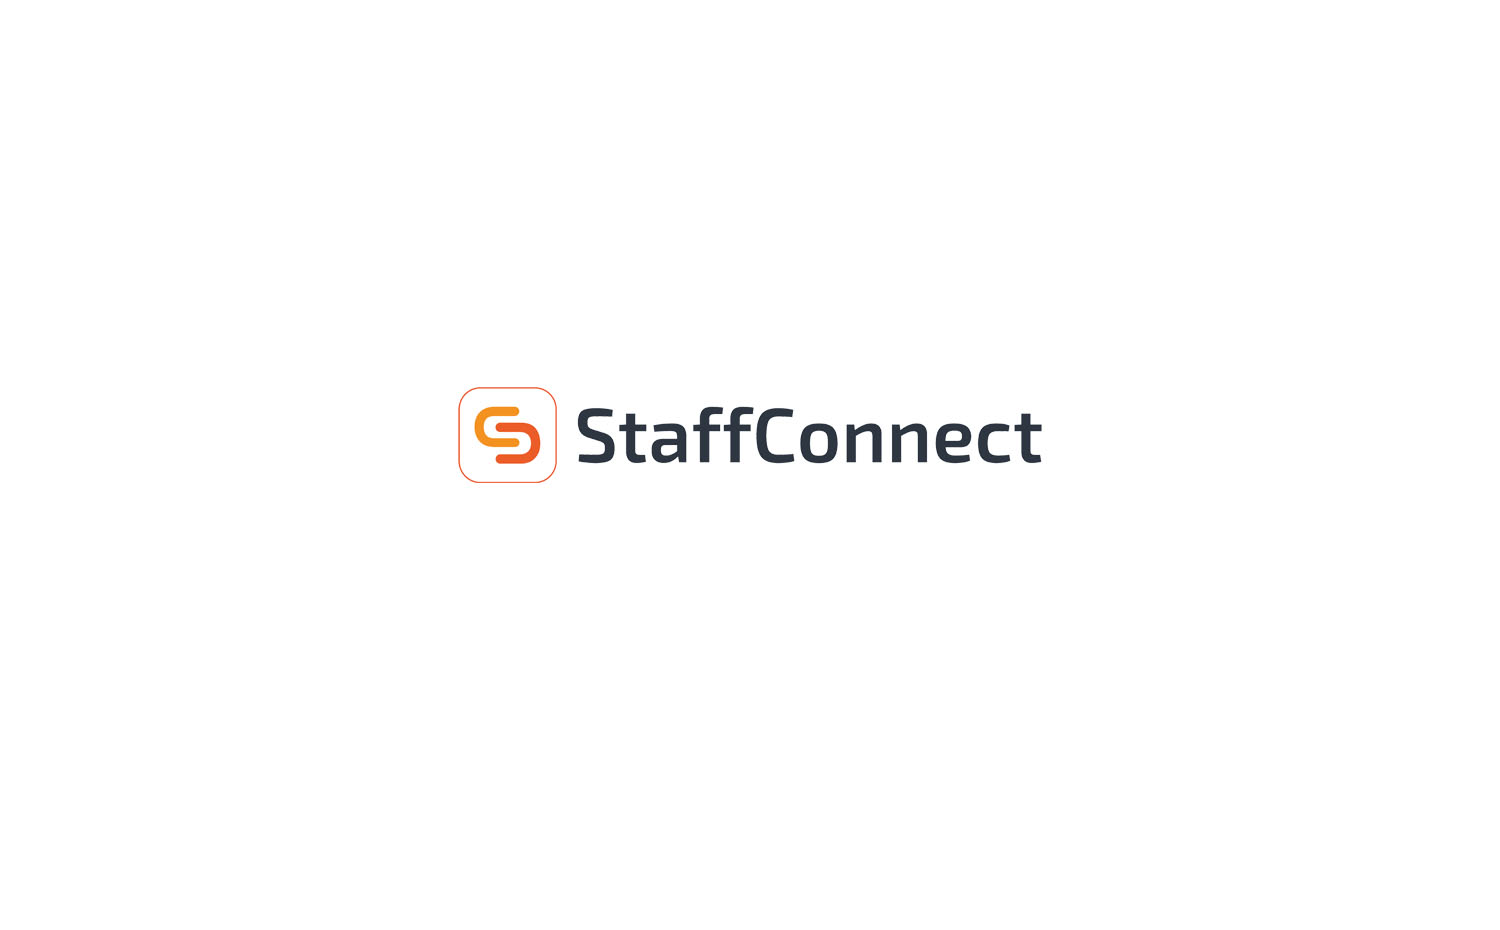 StaffConnect Announces Partnership With Lumi to integrate...